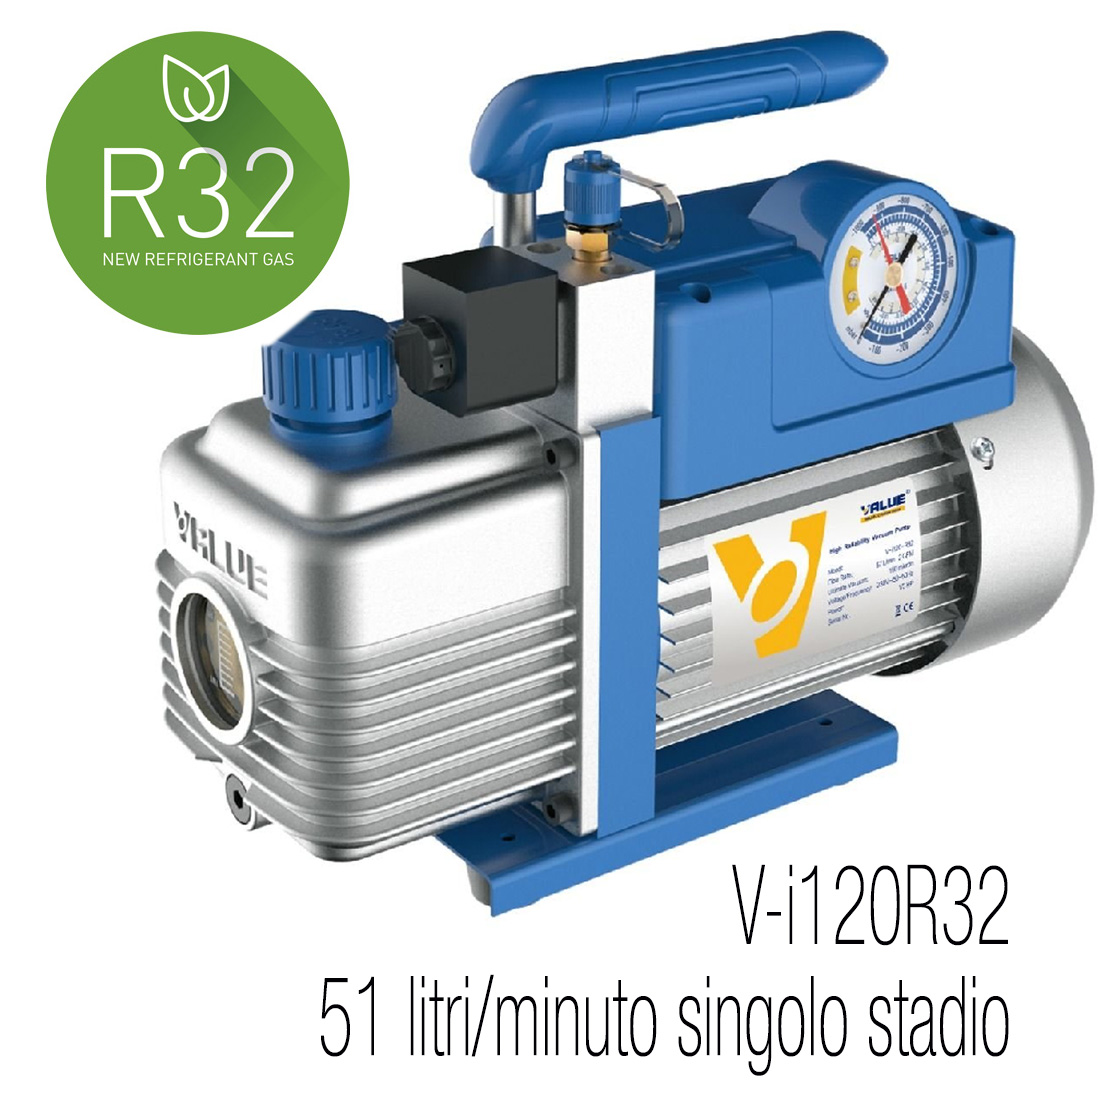 VALUE Vacuum pump, single stage, suitable for A2L, flow rate 51 litri/minute, motor 1/4 HP, vacuum rate  0,2 mbar/29 Pa/150 micron - with solenoid valve and vacuum gauge